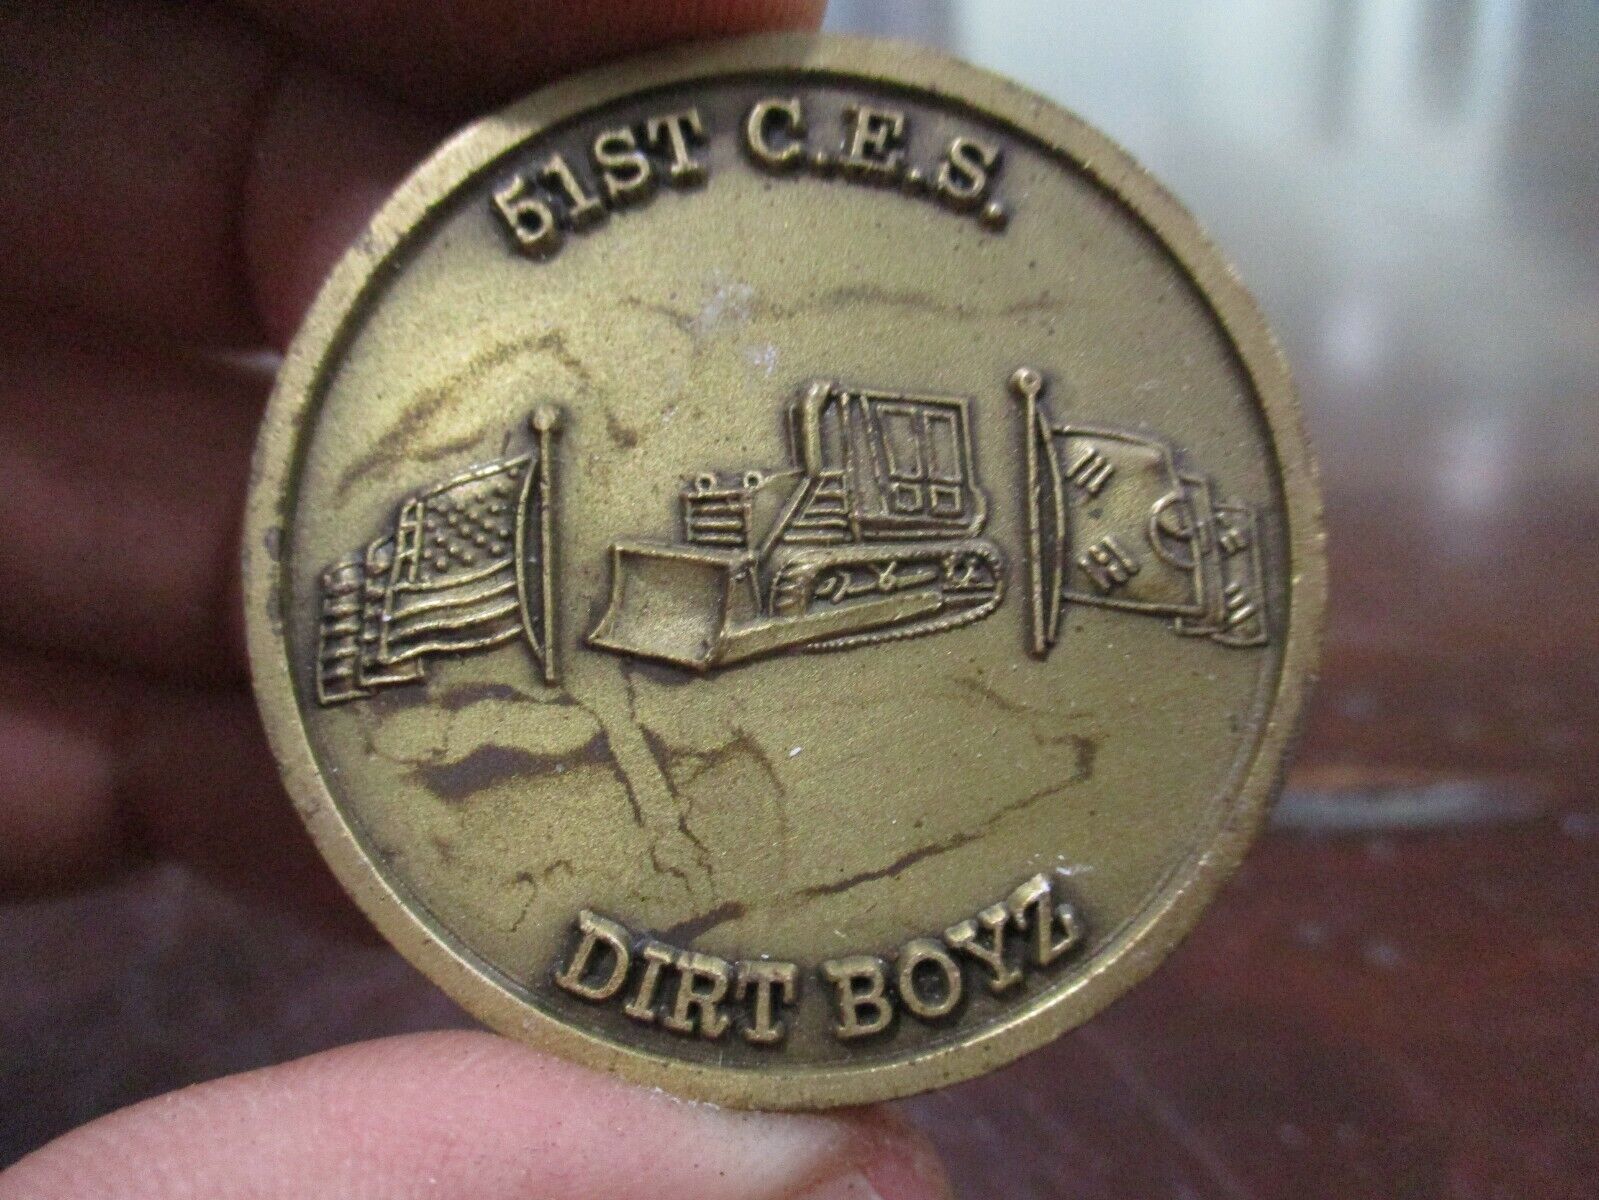 51ST C.E.S.DIRT BOYZ,UNITED STATES AIR FORCE CIVIL ENGINEER BRASS CHALLENGE COIN